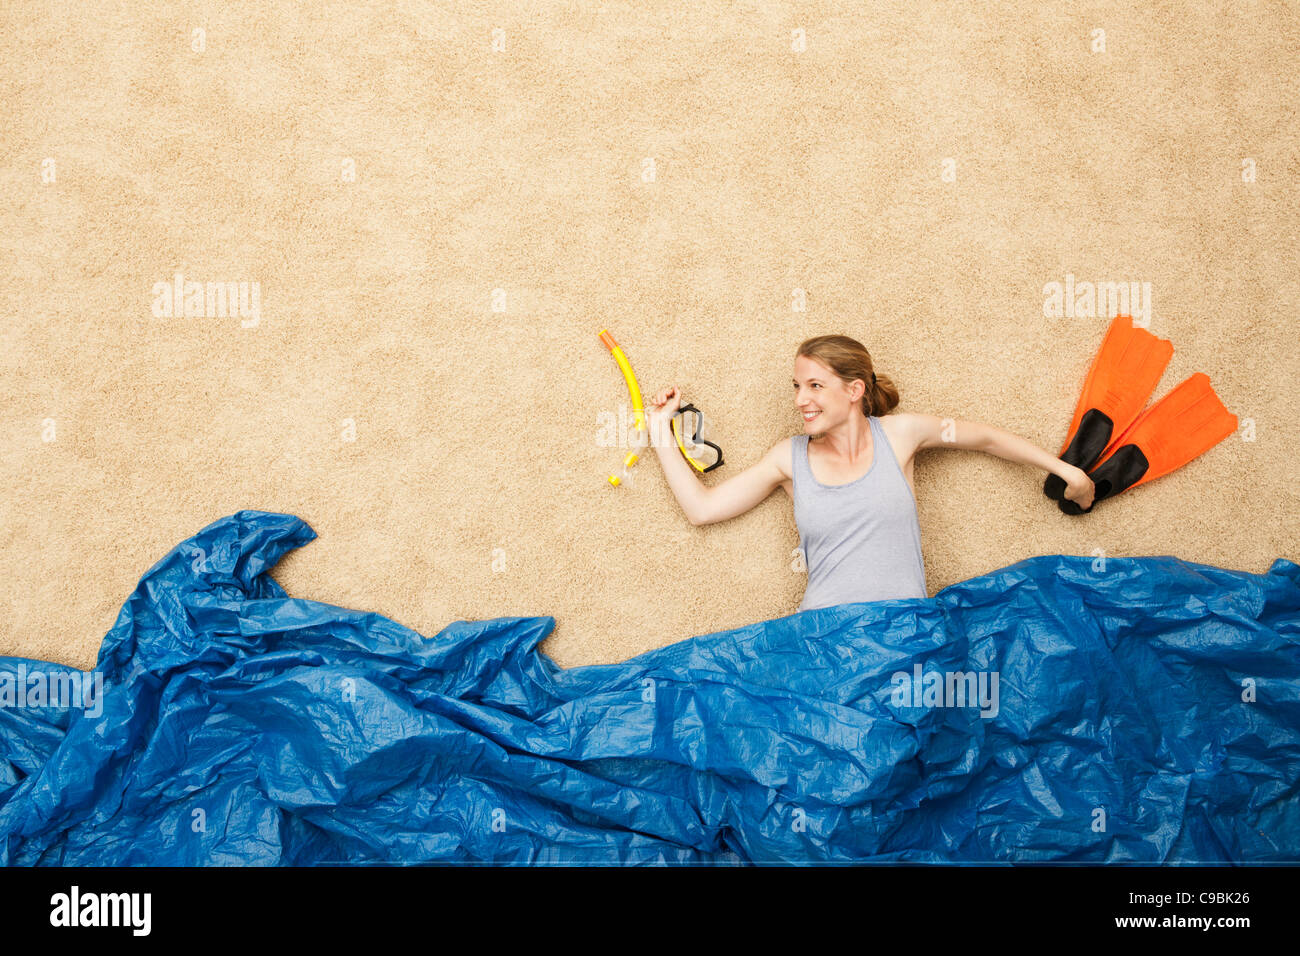 Germany, Young woman snorkling equipemts in water Stock Photo